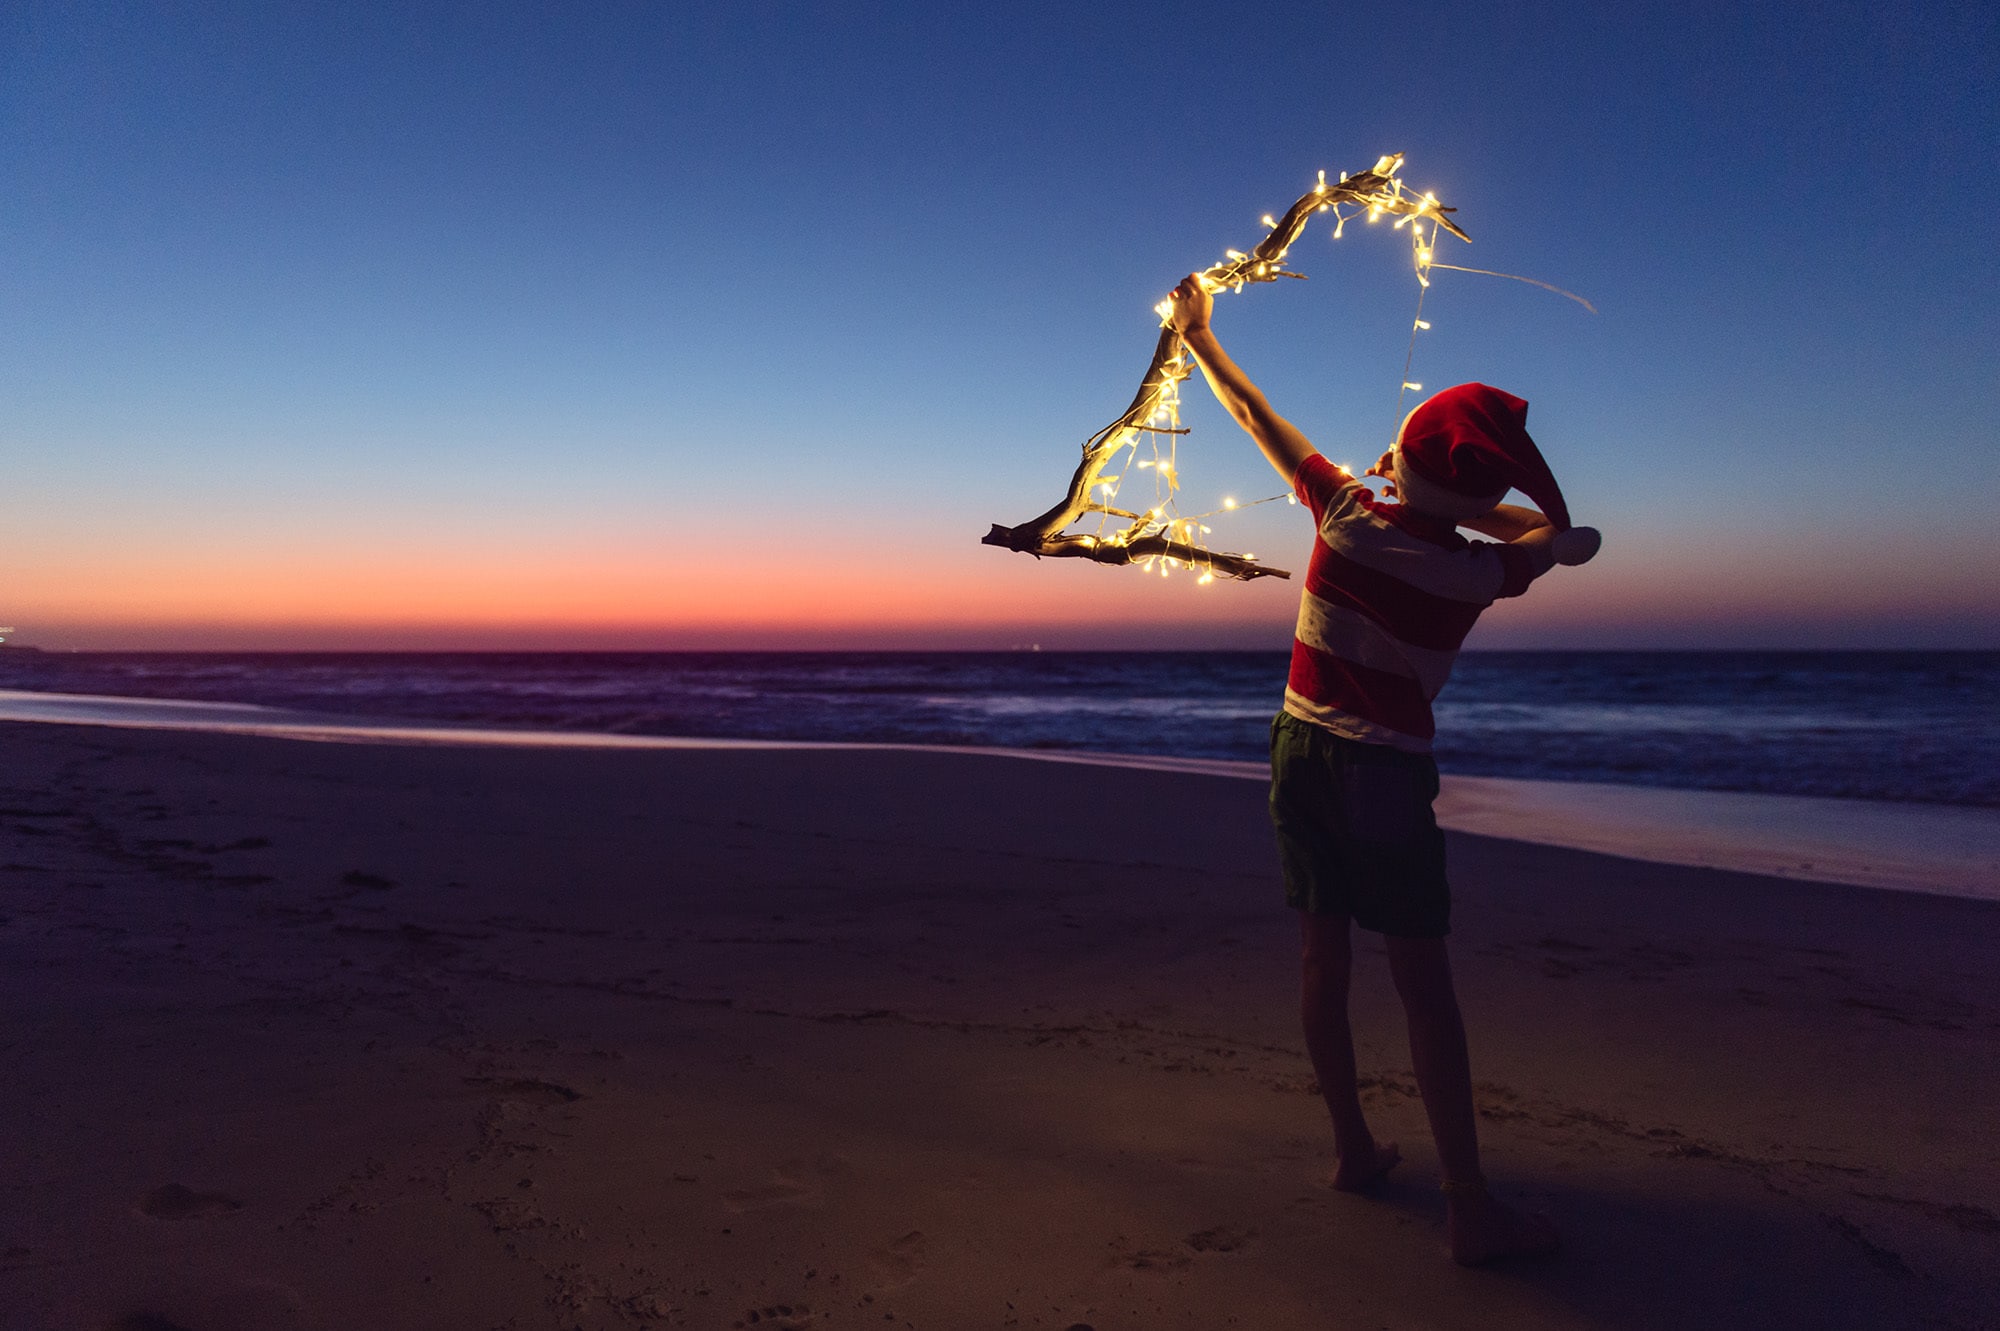 Boy With Christmas Lights At The Beach After Sunset An evening at the beach at Christmas time in https://www.stocksy.com/angelalumsden/showcase?page=1 Australia